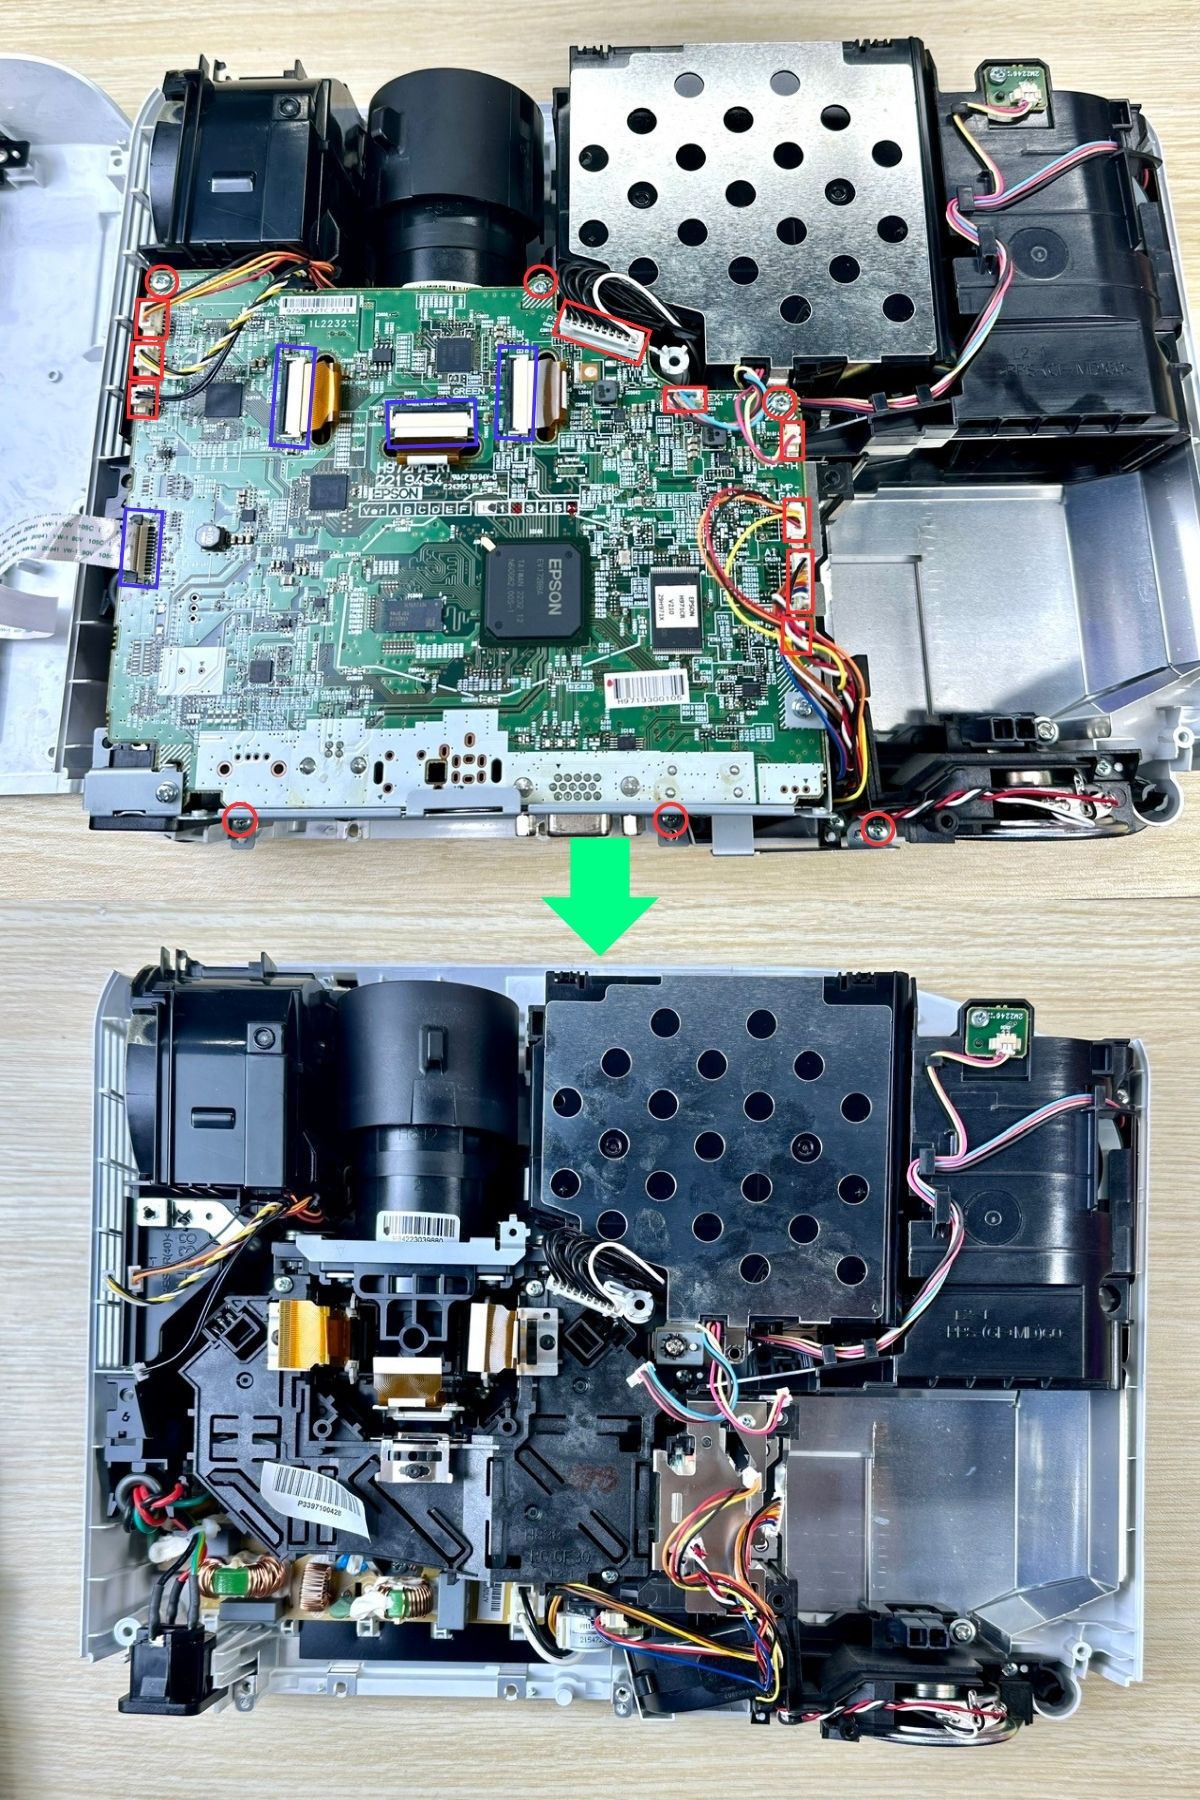 Remove the mainboard & the metal bracket of an epson projector